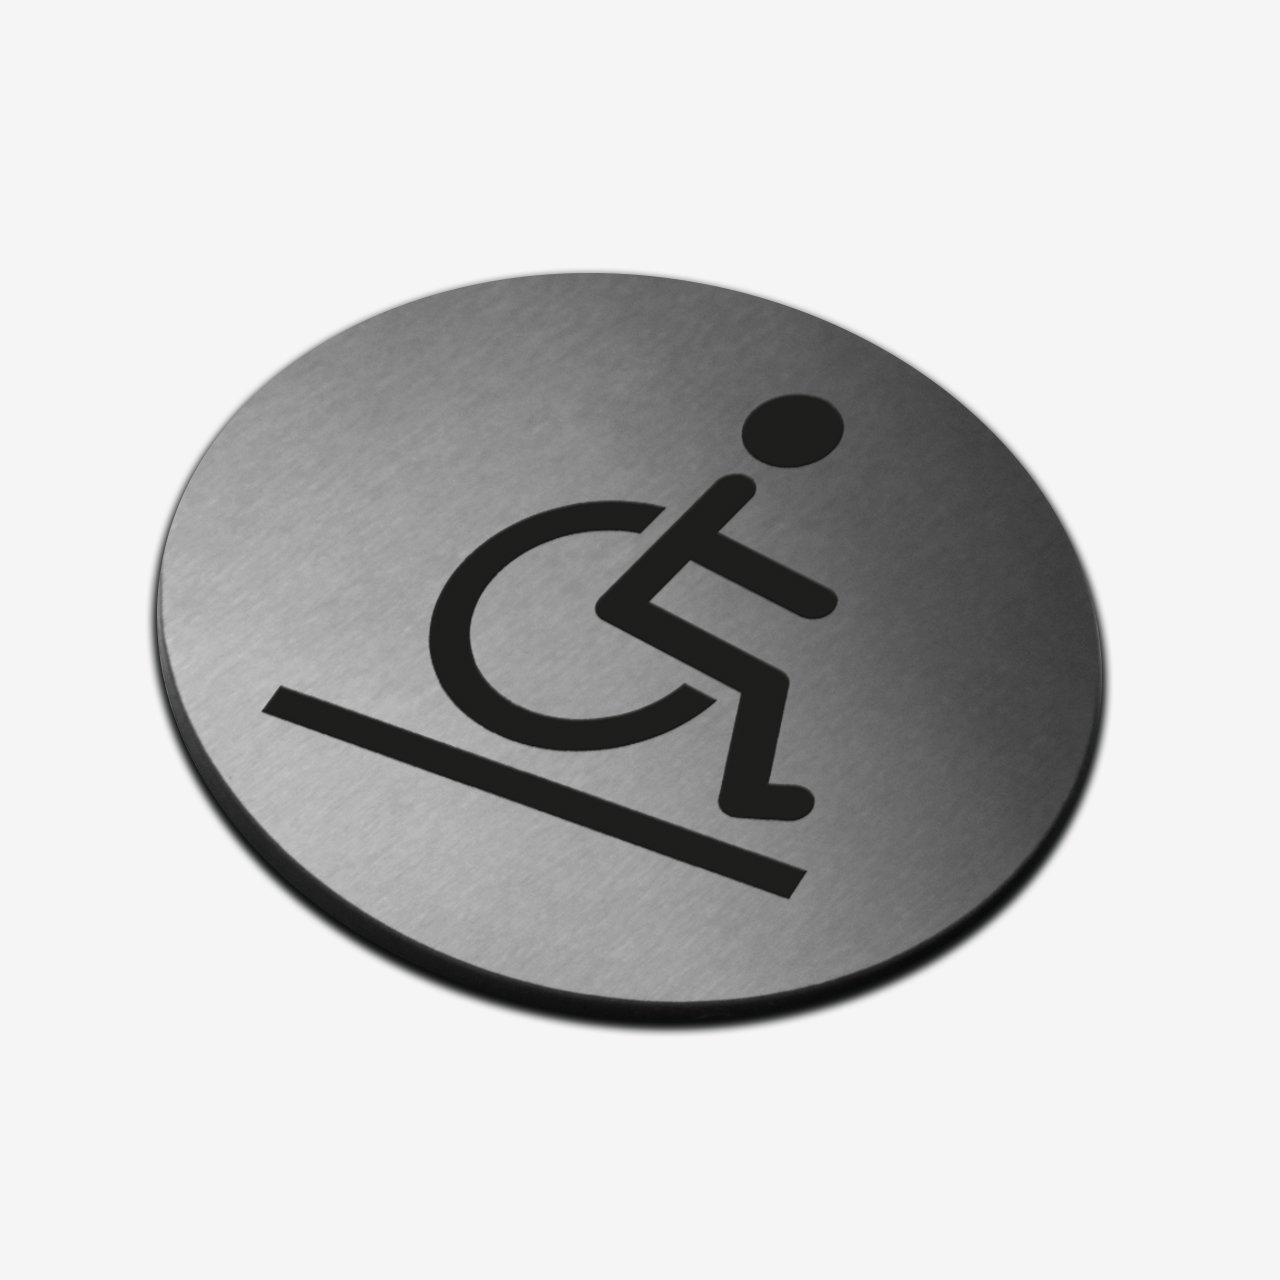 Disabled Access - Stainless Steel Sign Information signs circle Bsign